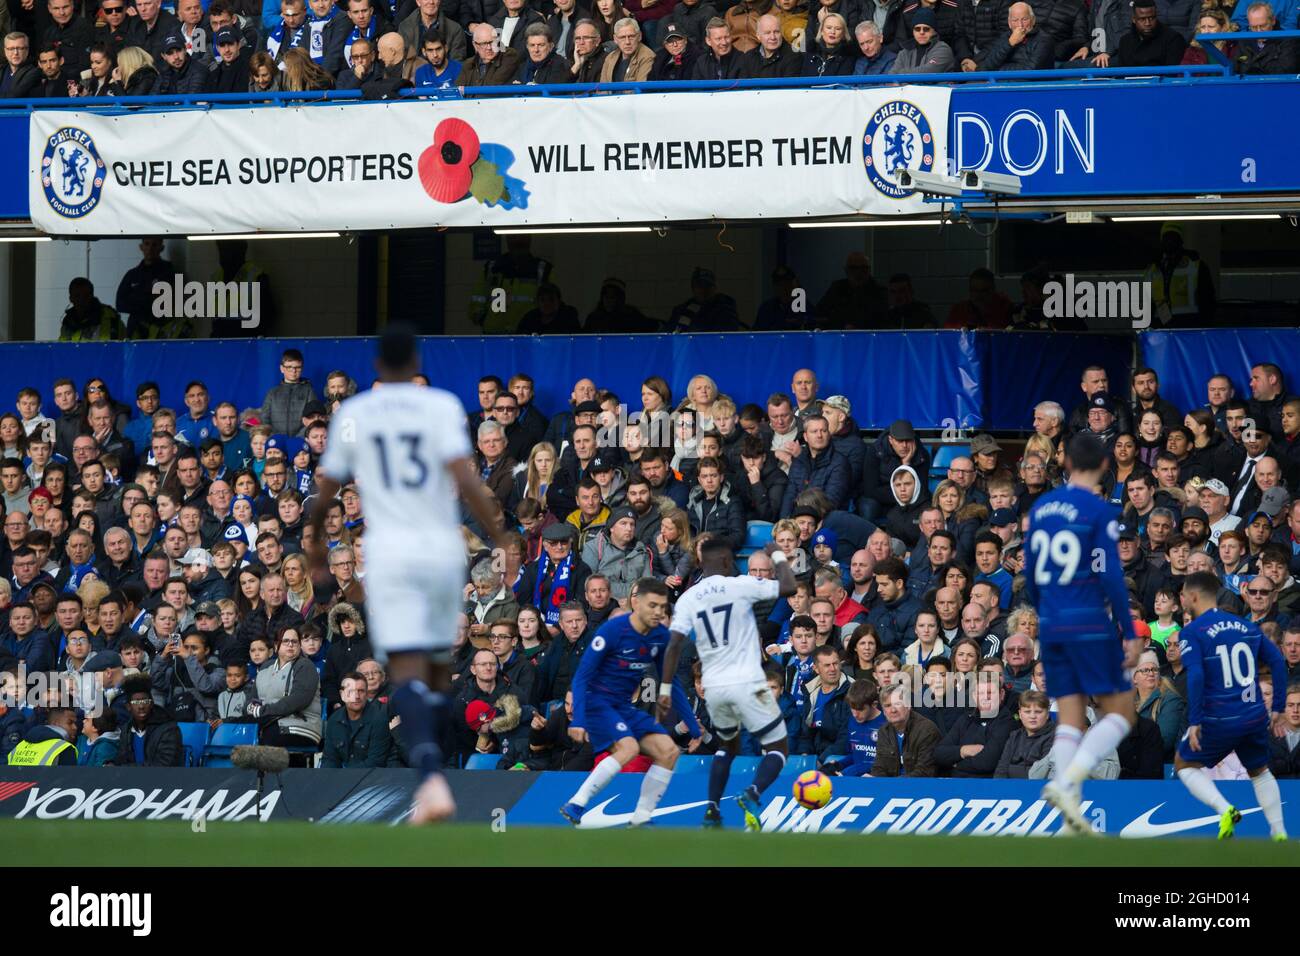 A Remembrance Day banner saying 'Chelsea supporters will remember them' on display during the Premier League match at Stamford Bridge, London. Picture date: 11th November 2018. Picture credit should read: Craig Mercer/Sportimage via PA Images Stock Photo